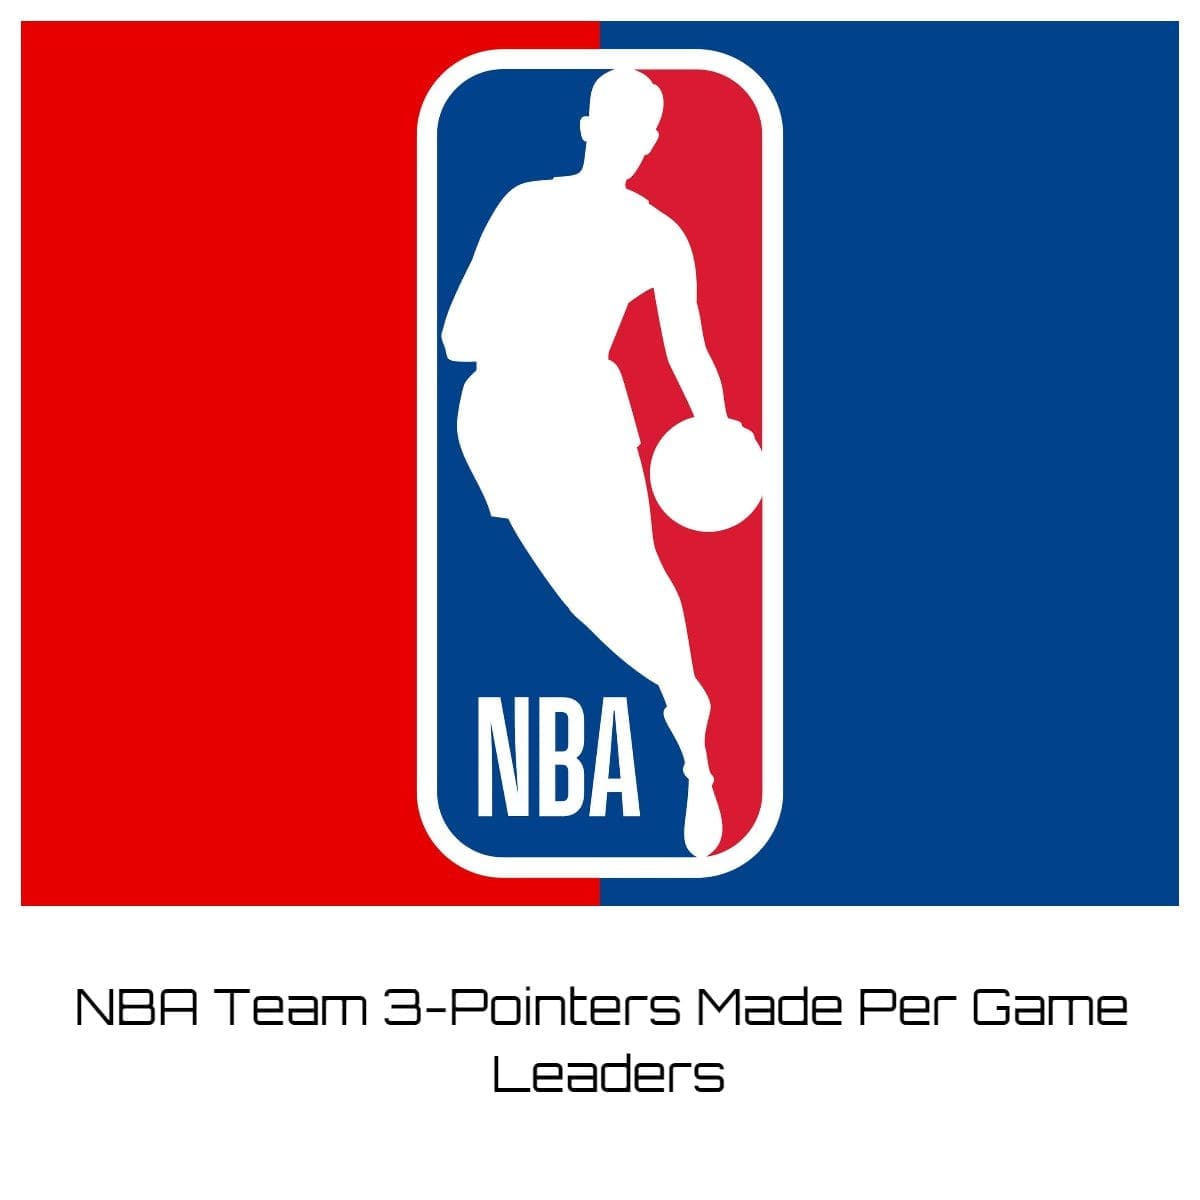 NBA Team 3-Pointers Made Per Game Leaders